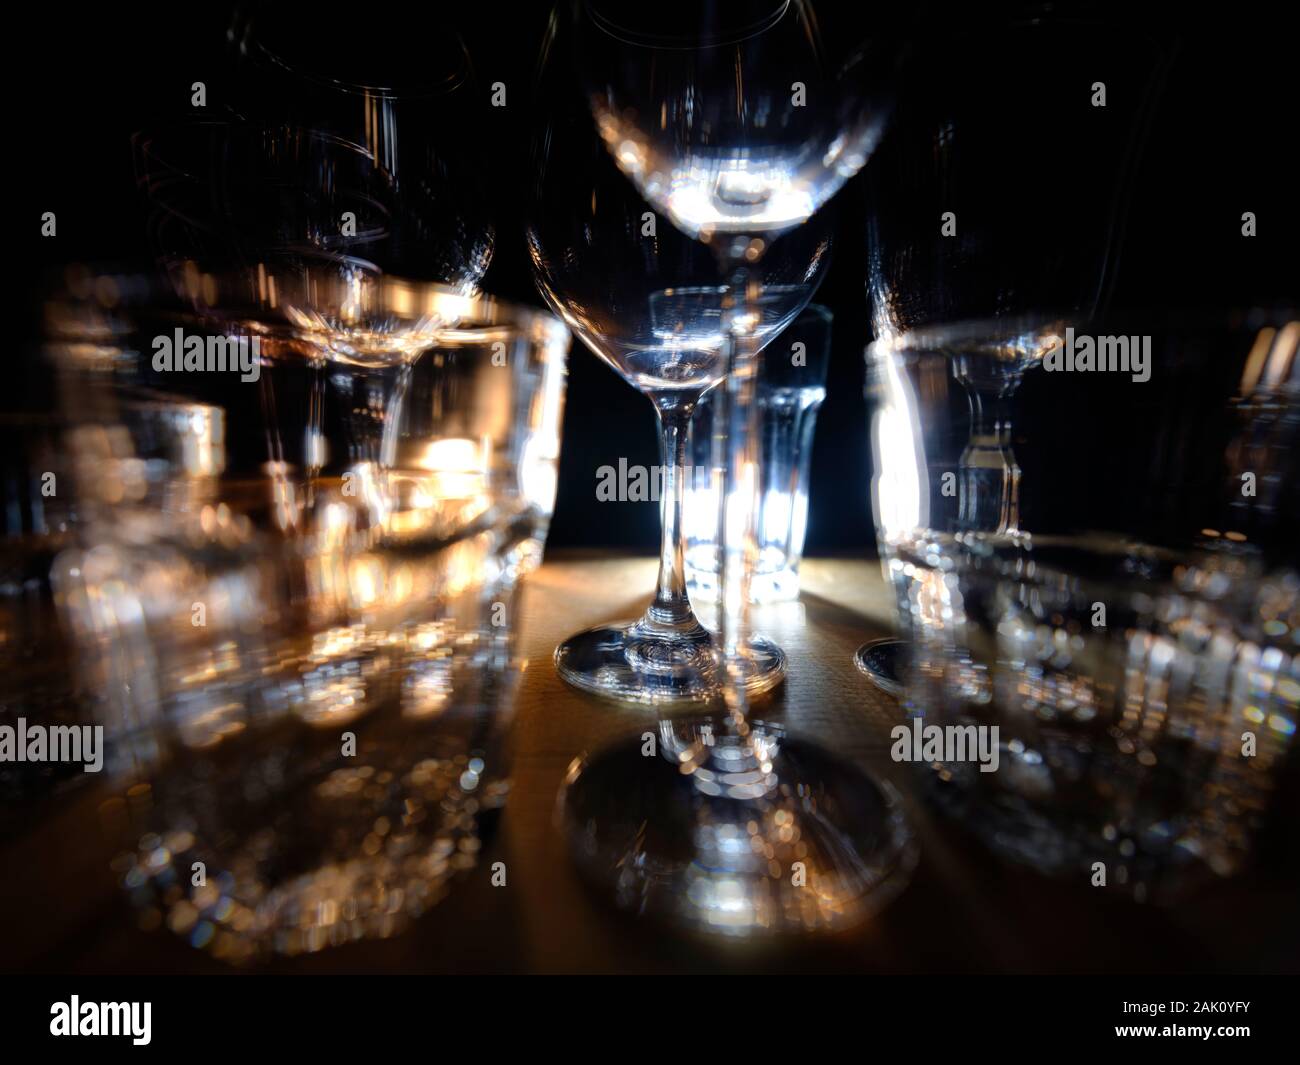 Close ups of wine-, long drink- and spirits-glasses on a wooden shelve in a bar environment, in fron of a dark background, illuminated by colorful spo Stock Photo